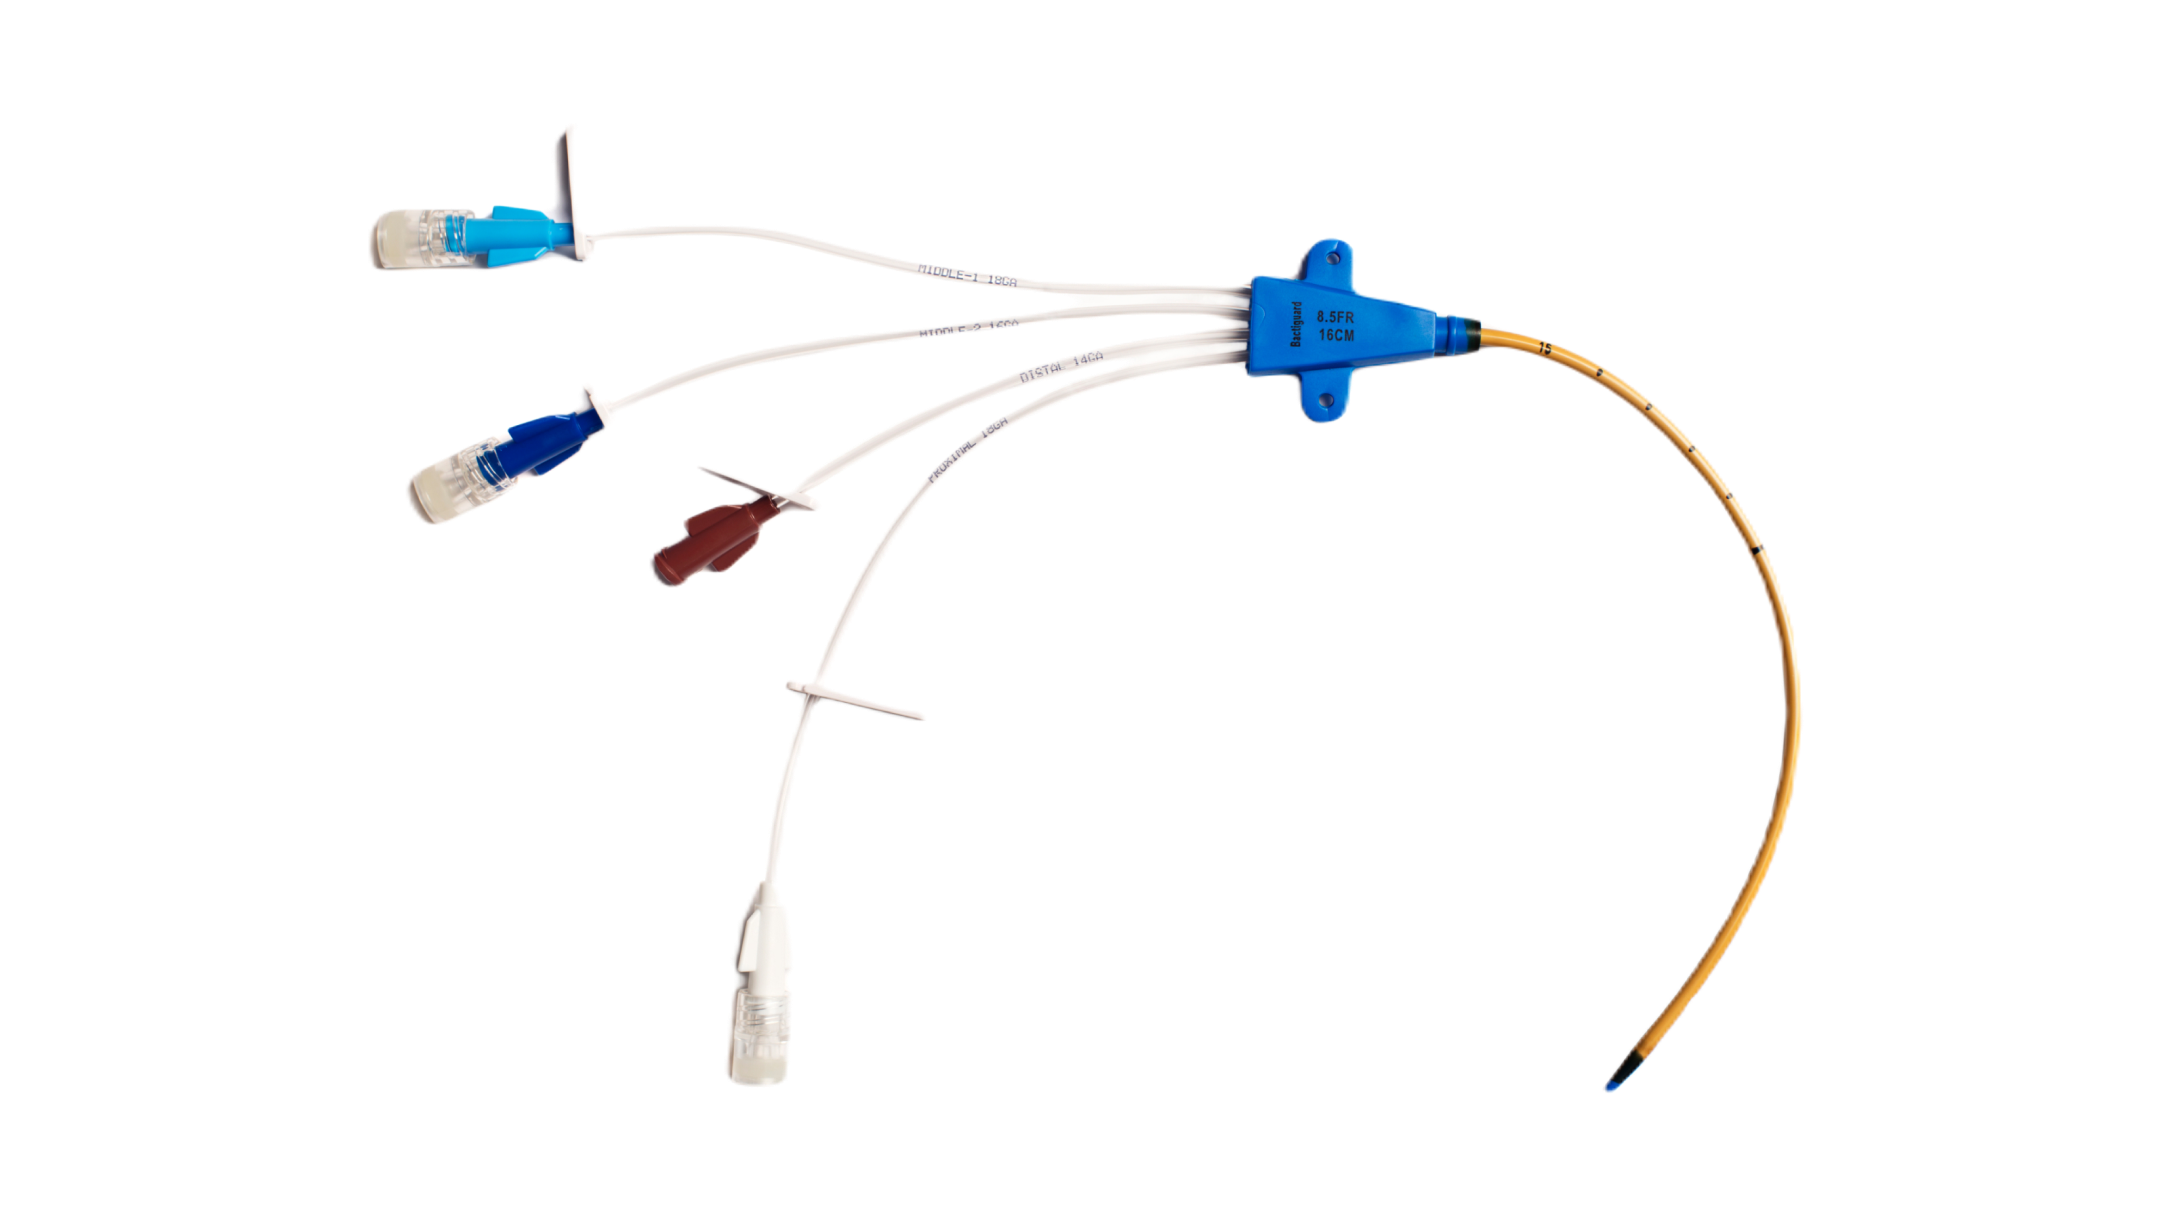 Clinical study launched to compare efficacy of Bactiguard coated central venous catheters with non-coated